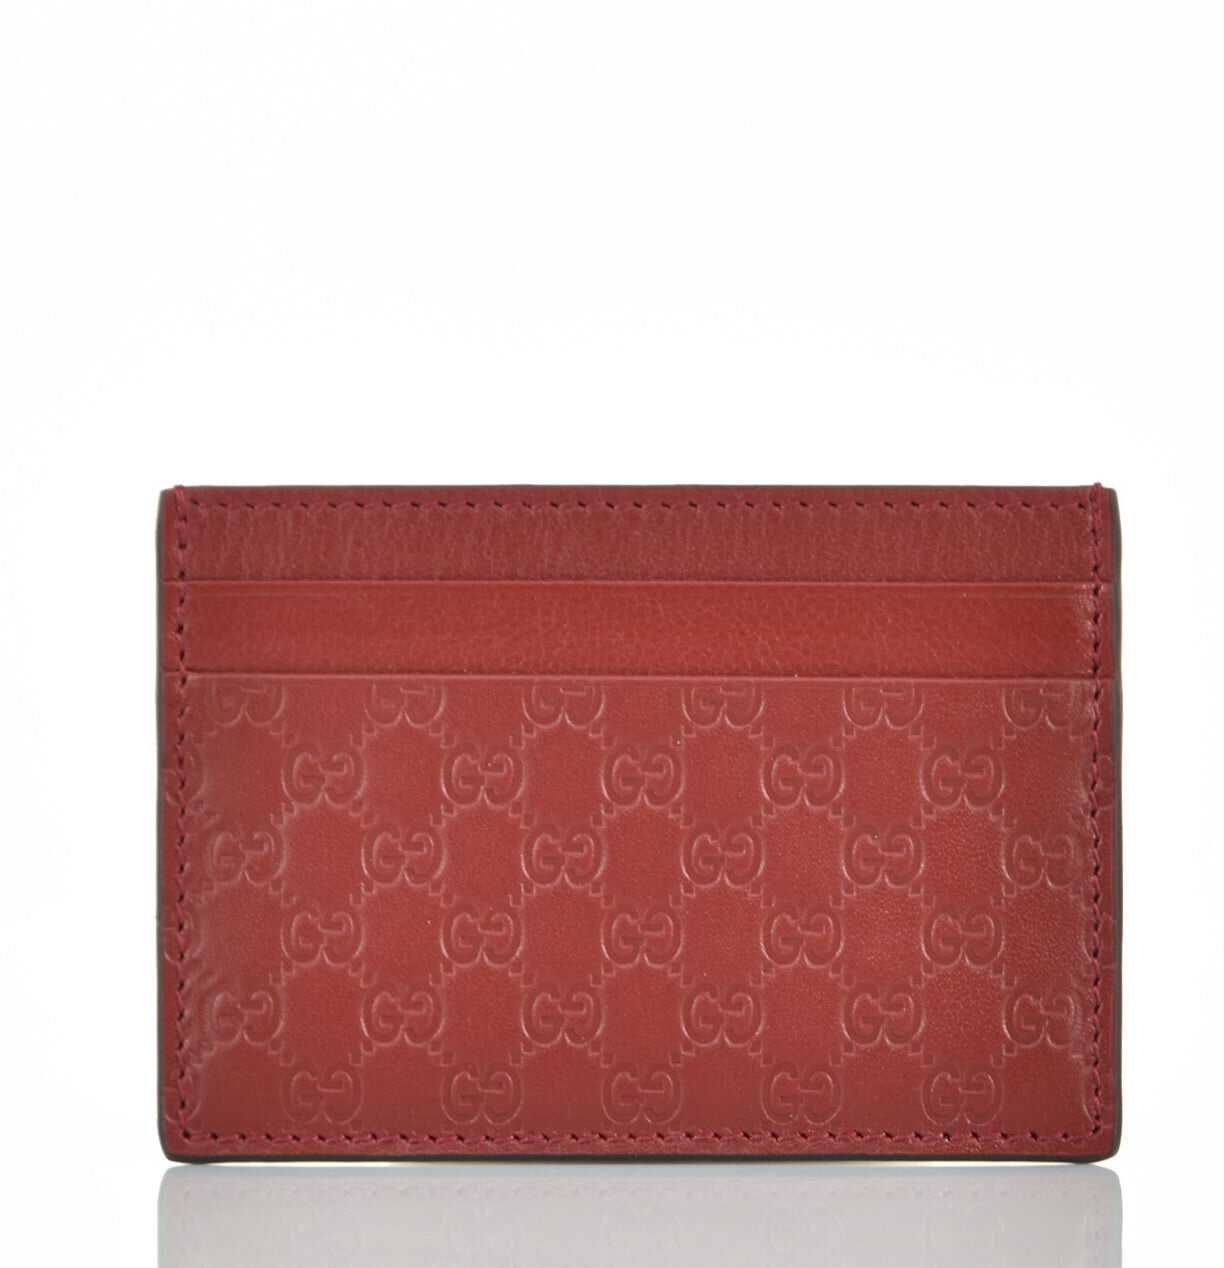 Gucci Leather Wallet RED